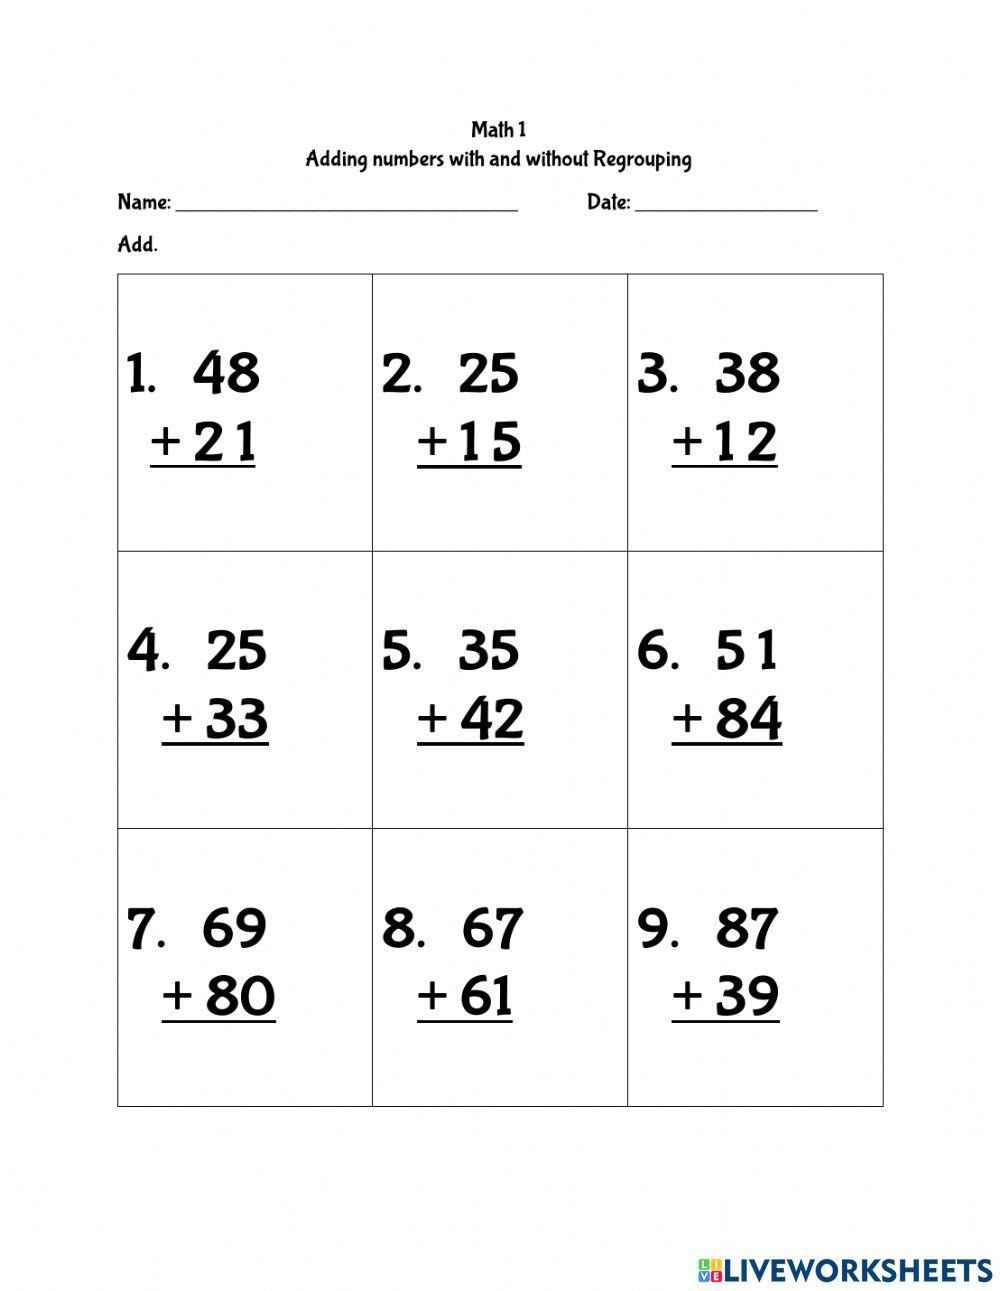 Adding numbers with and without Regrouping